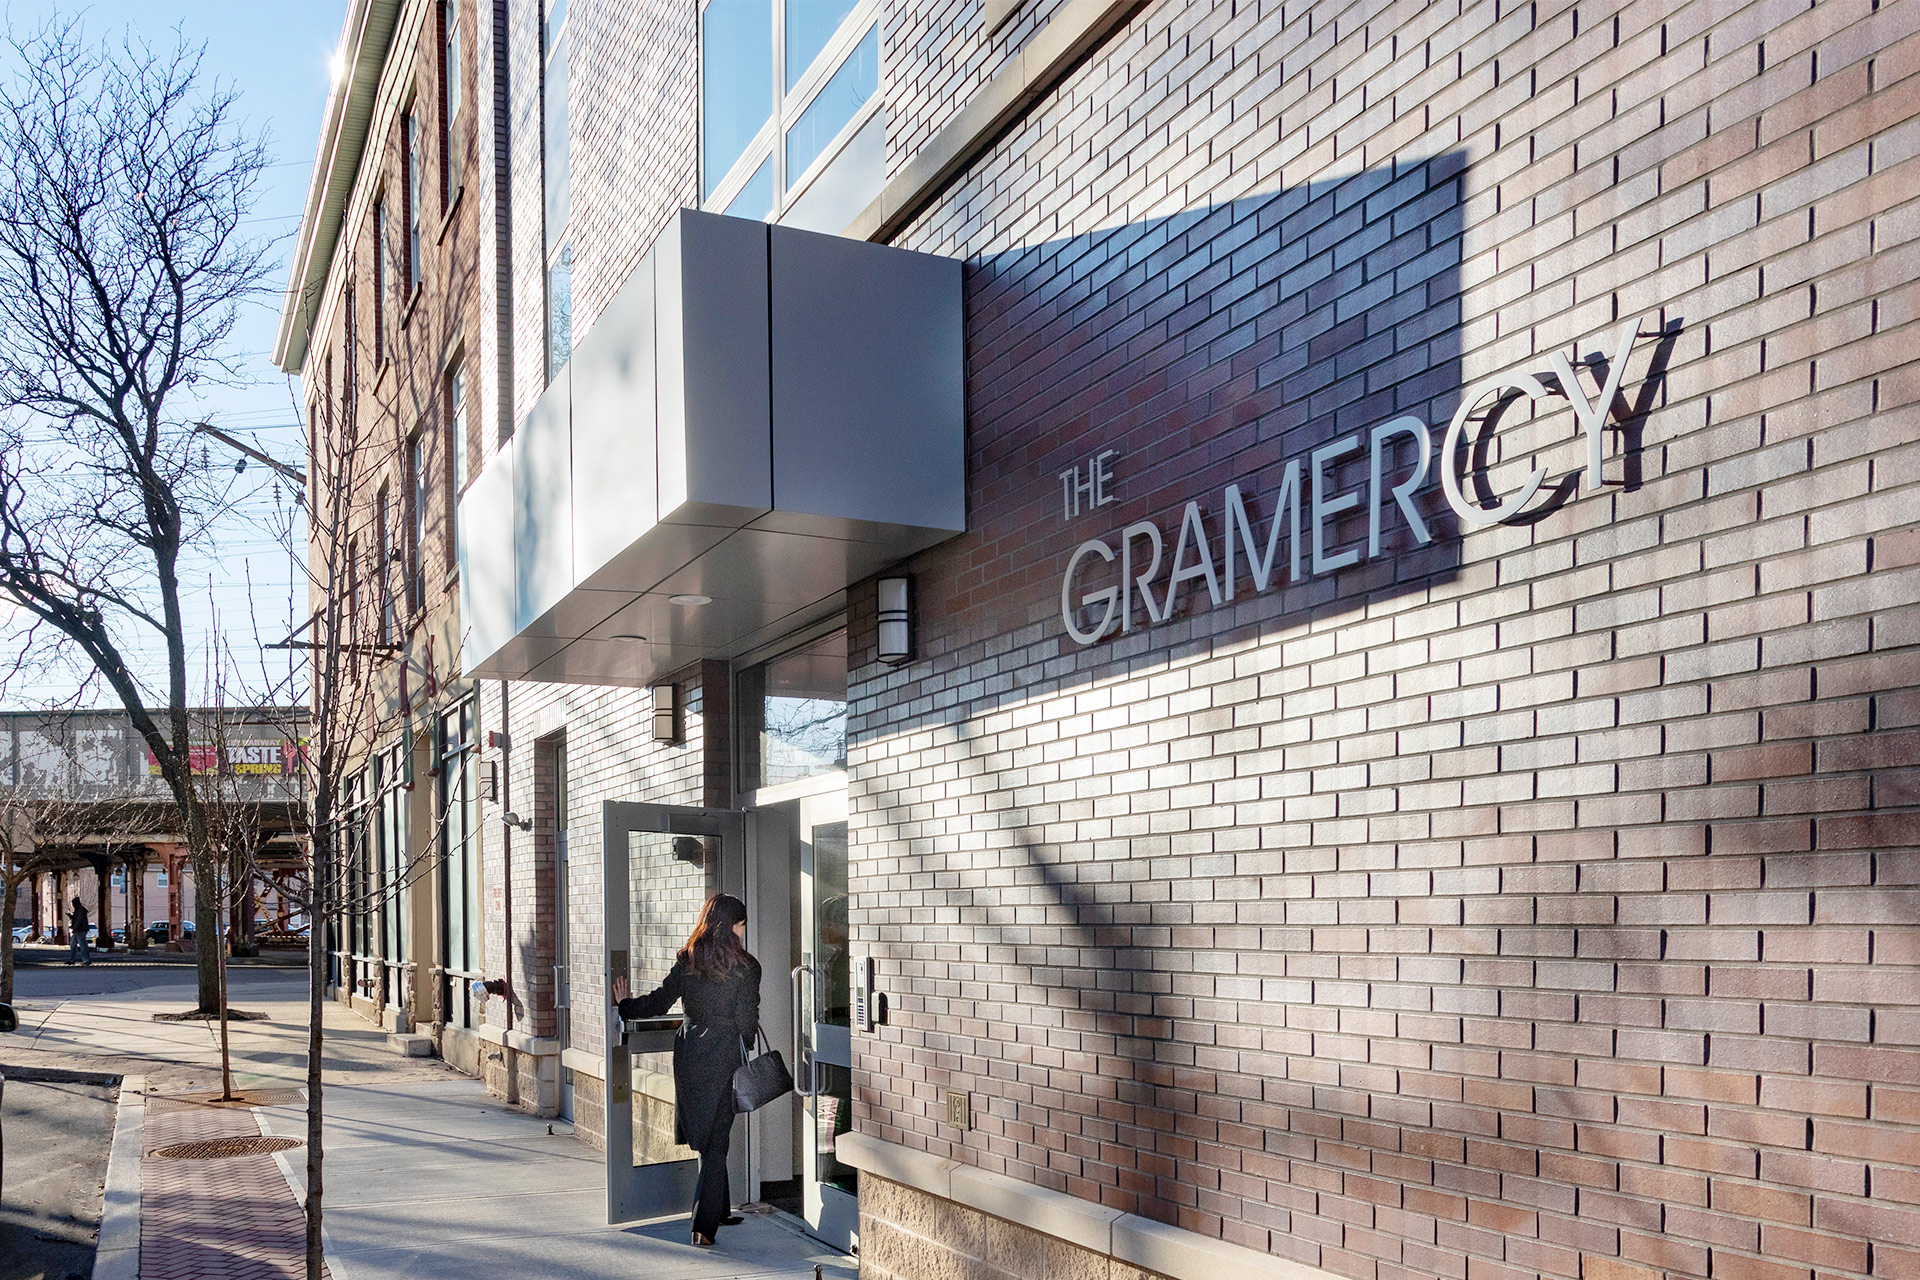 The Gramercy Entrance